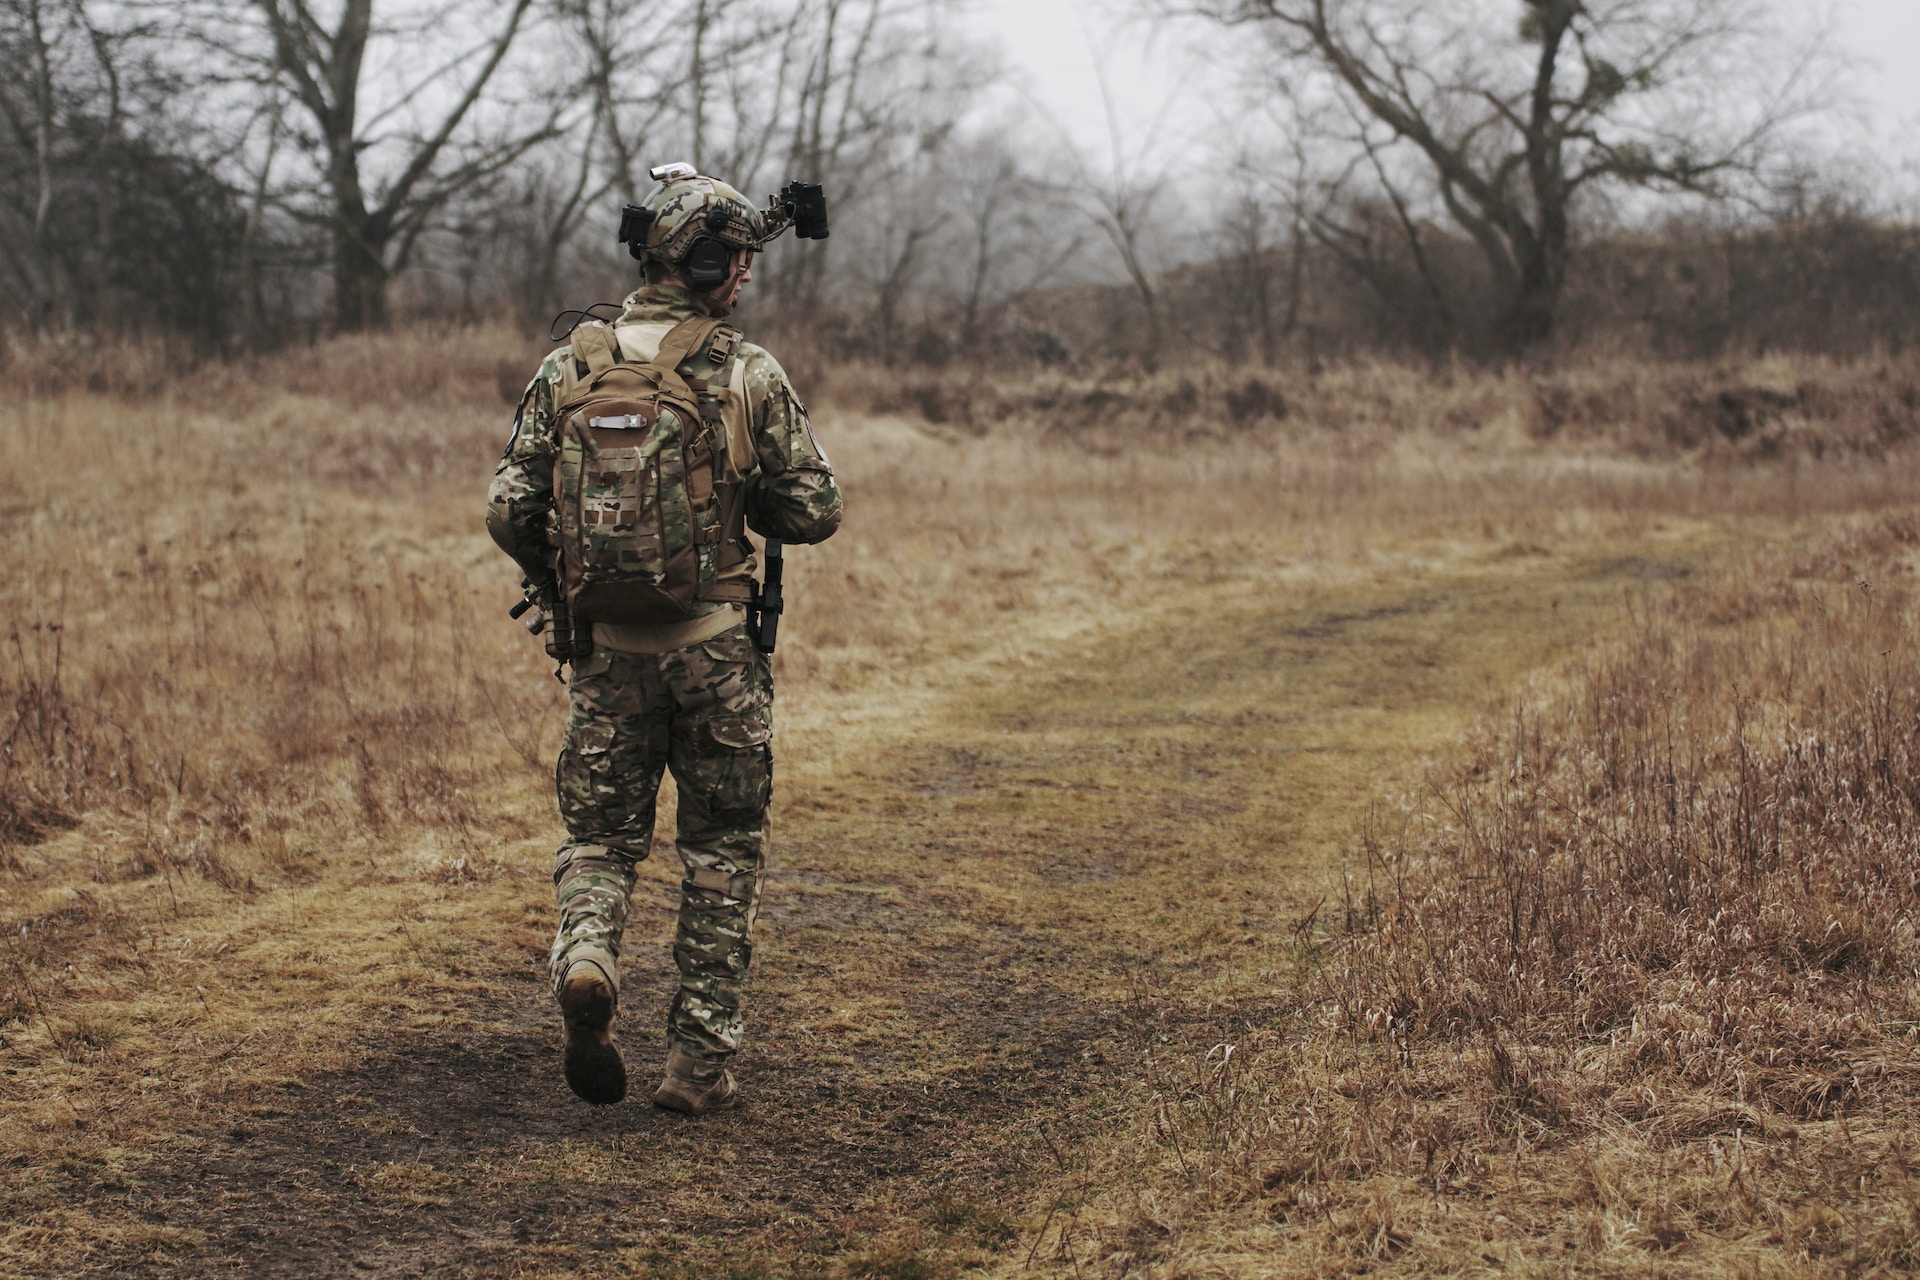 The Best Tactical Gear for Gun Lovers - Texas Outdoors by the Coker Boys